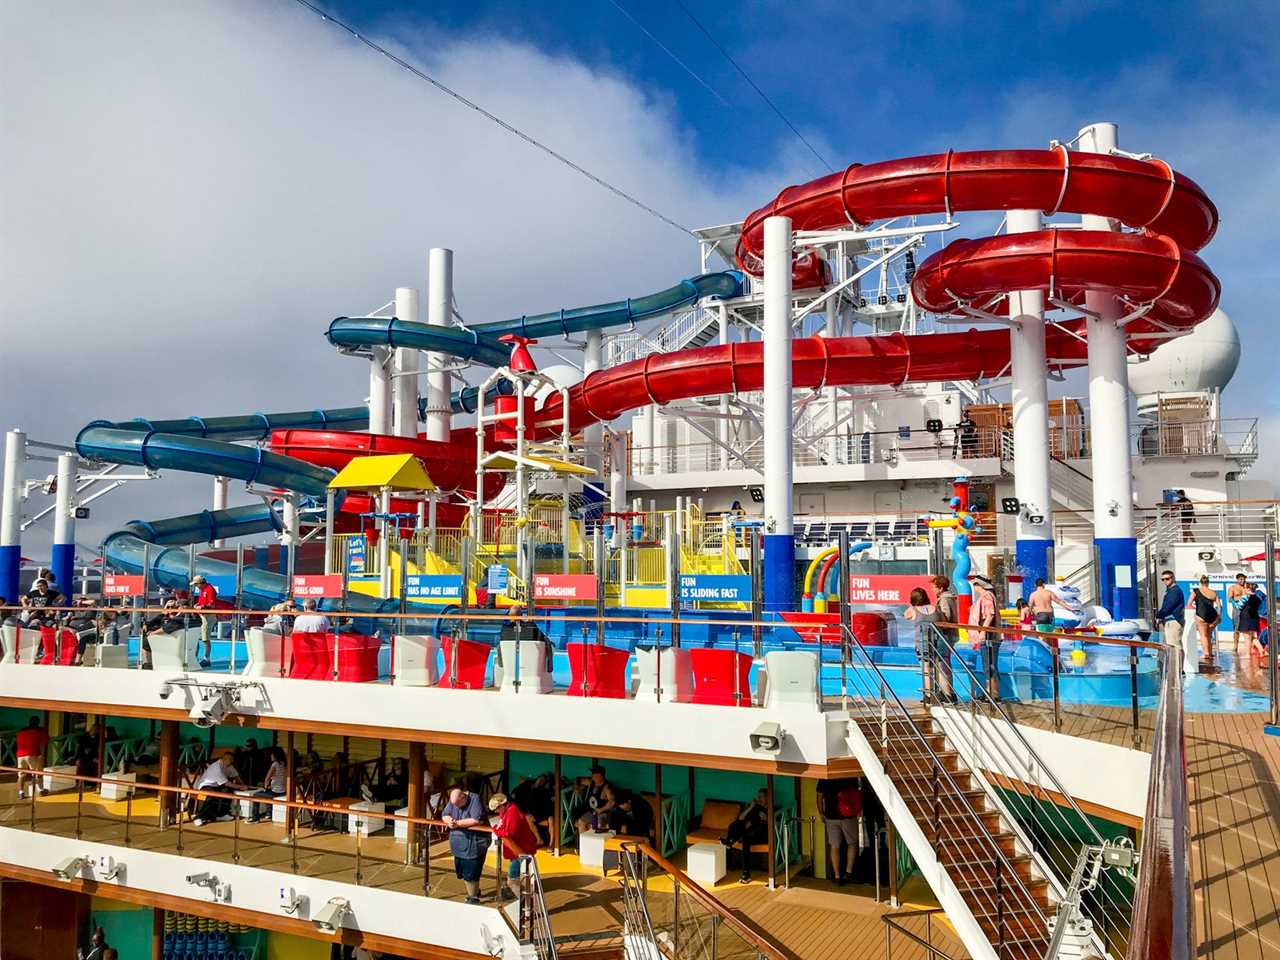 Carnival Cruise Line's Carnival Panorama has one of the line's signature WaterWorks waterparks. Photo by Gene Sloan/The Points Guy.